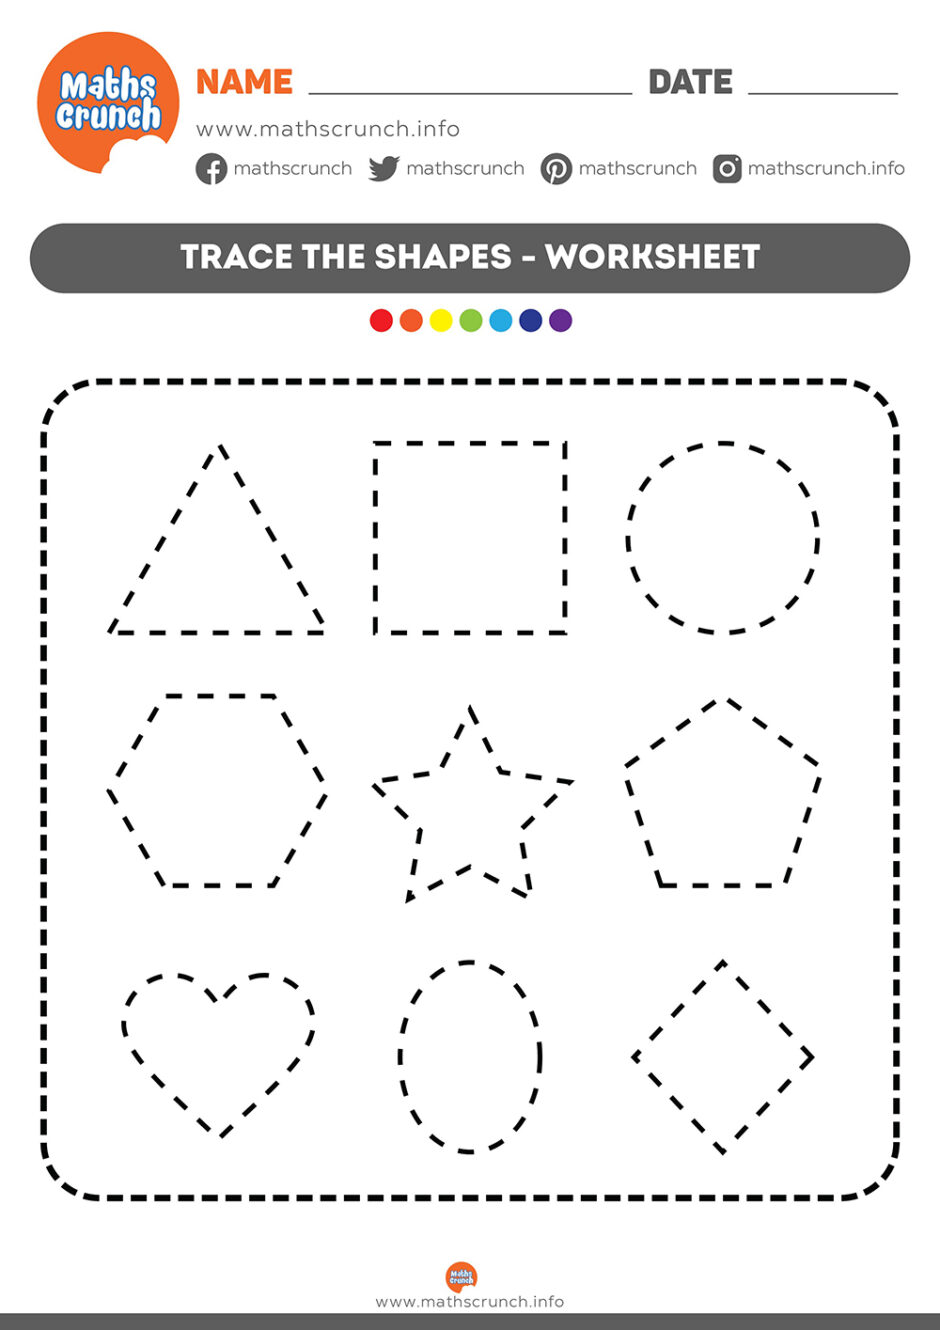 Get free printable tracing the shapes worksheet for school kids education in a PDF file